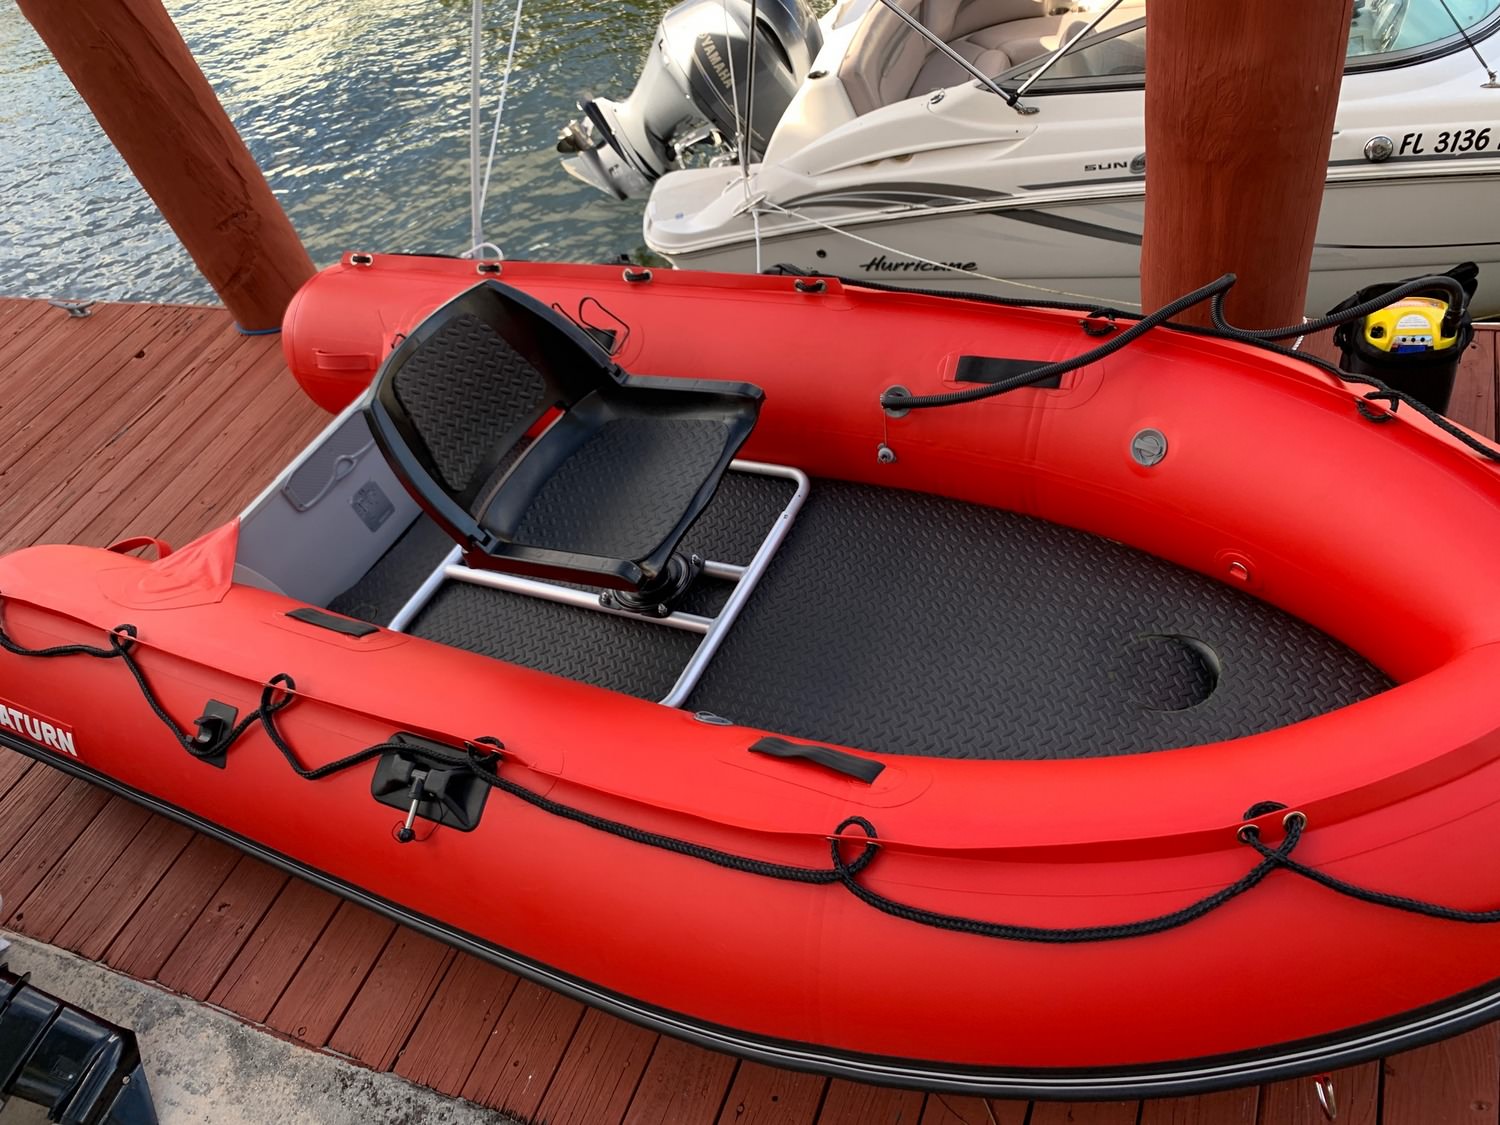 Dioche Inflatable Boat Cushion Inflatable Boat Seat Pad for Drift Boat Kayaking Inflatable Boat 